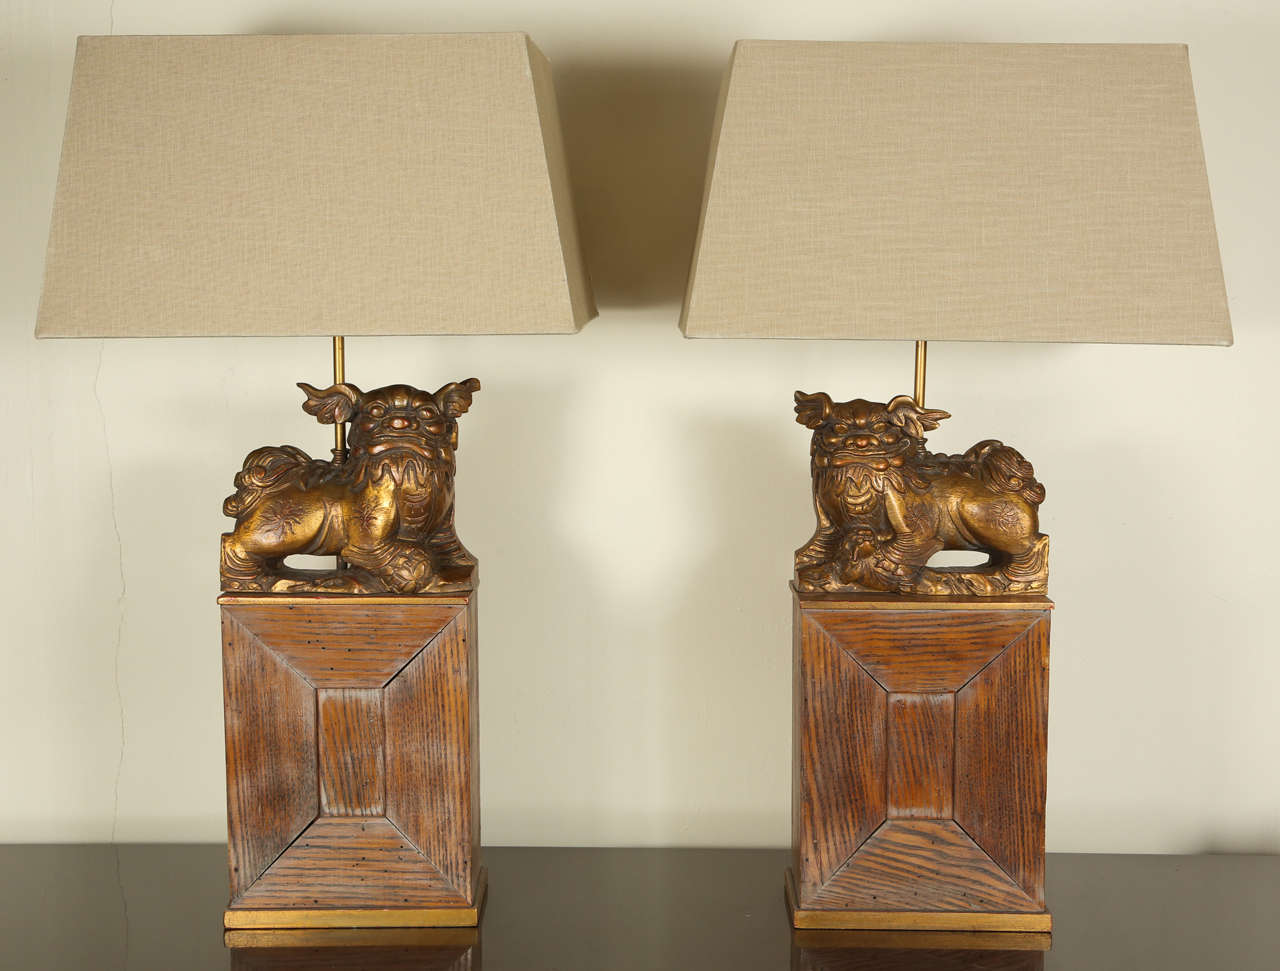 Pair of Stunning foo dog lamps by James Mont.  The slightly distressed oak bases which have a honey colored and gilded finish too them, feature carved wooden Foo Dogs with a gilded finish.  The rectangular shades perfectly compliment the lamps.